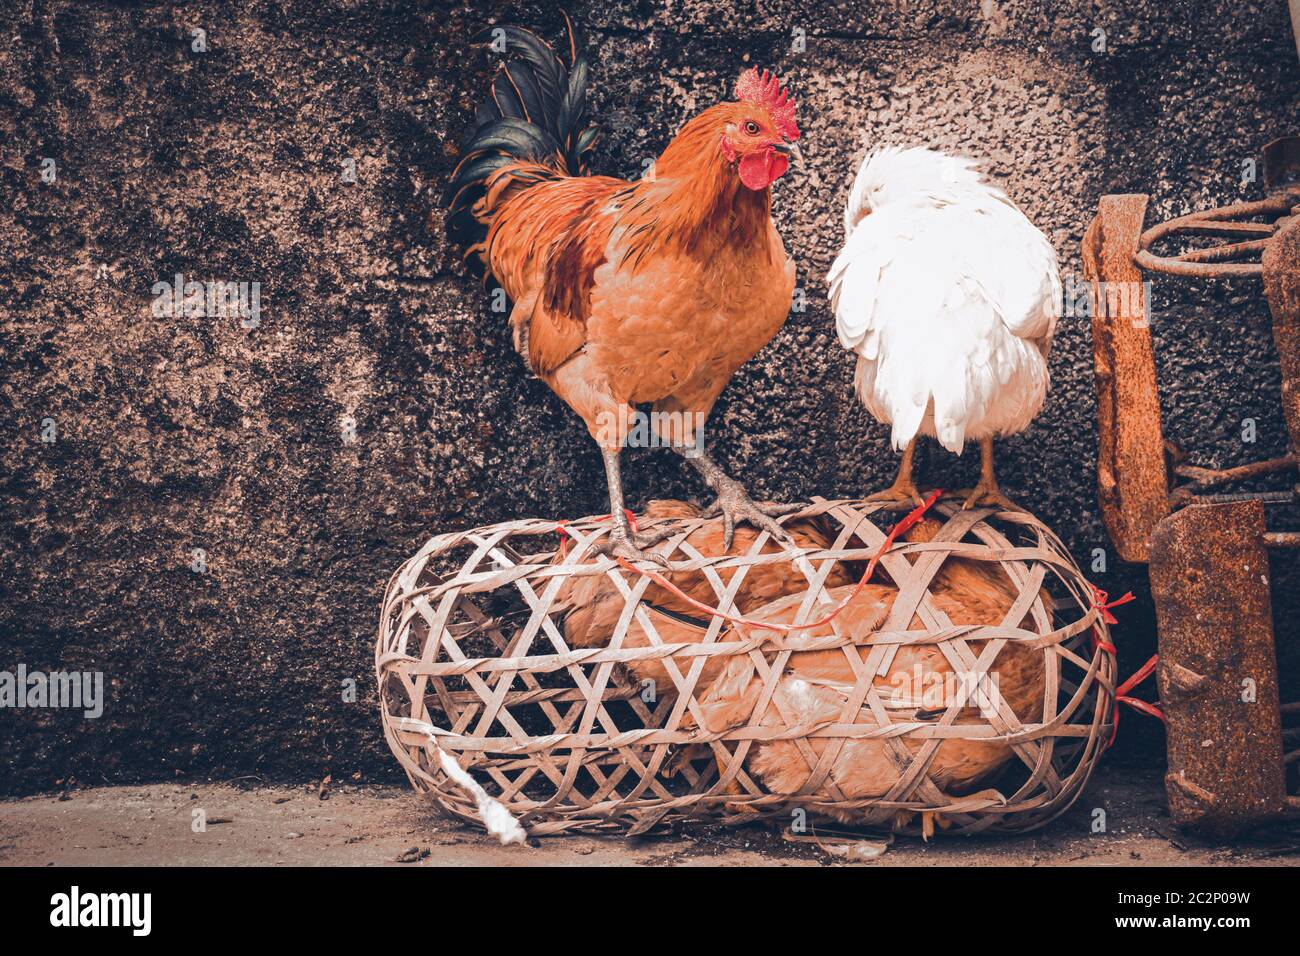 Free roaming native chickens in Ha giang, Vietnam that shows the village life, livelihood and culture Stock Photo